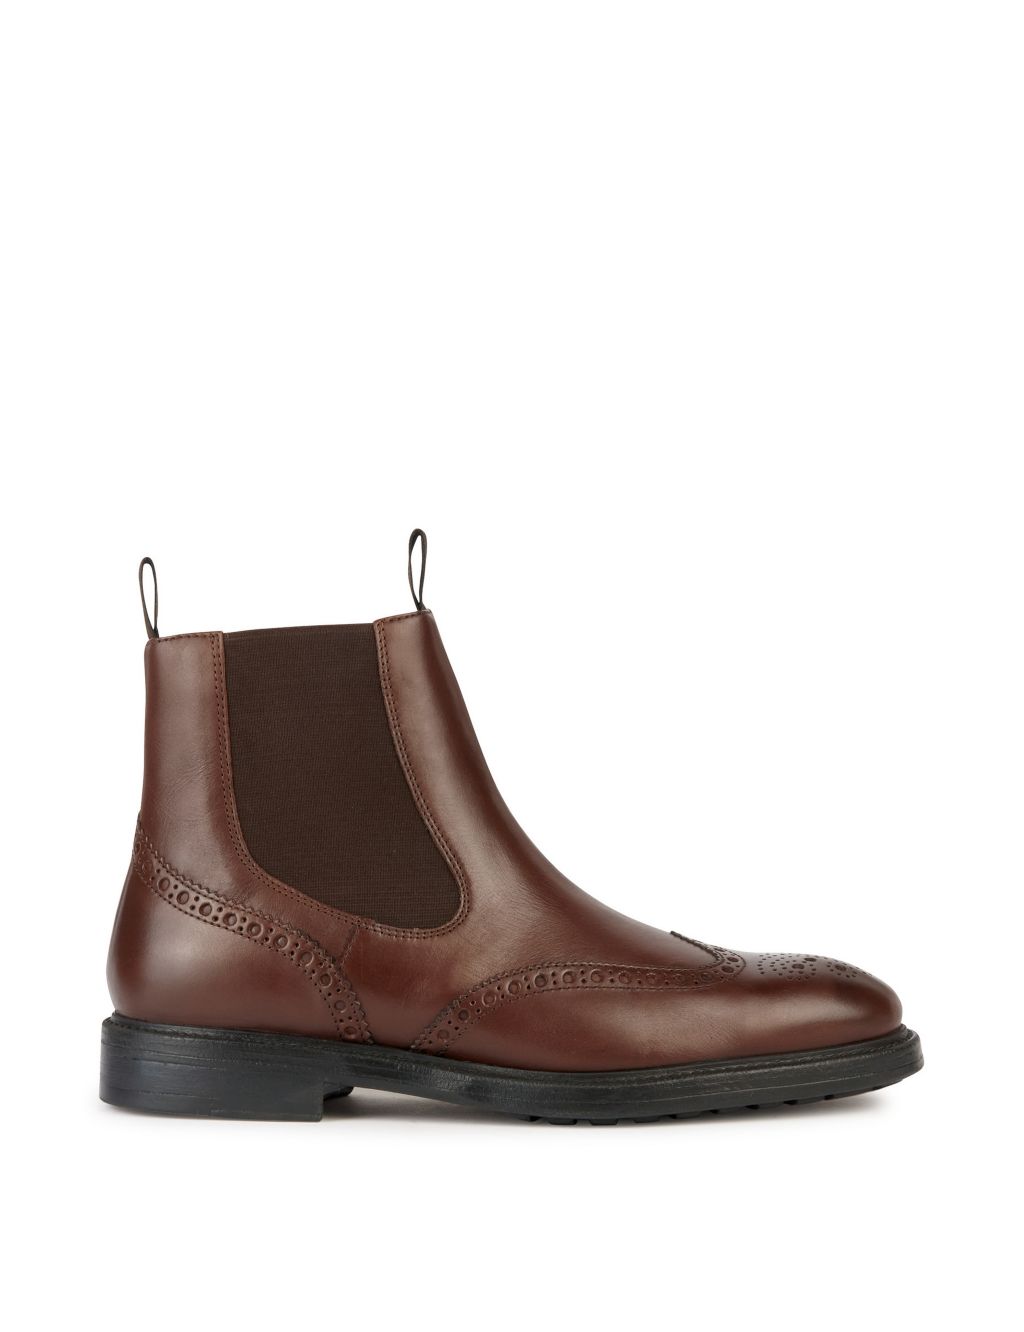 Wide Fit Leather Pull-On Chelsea Boots image 1